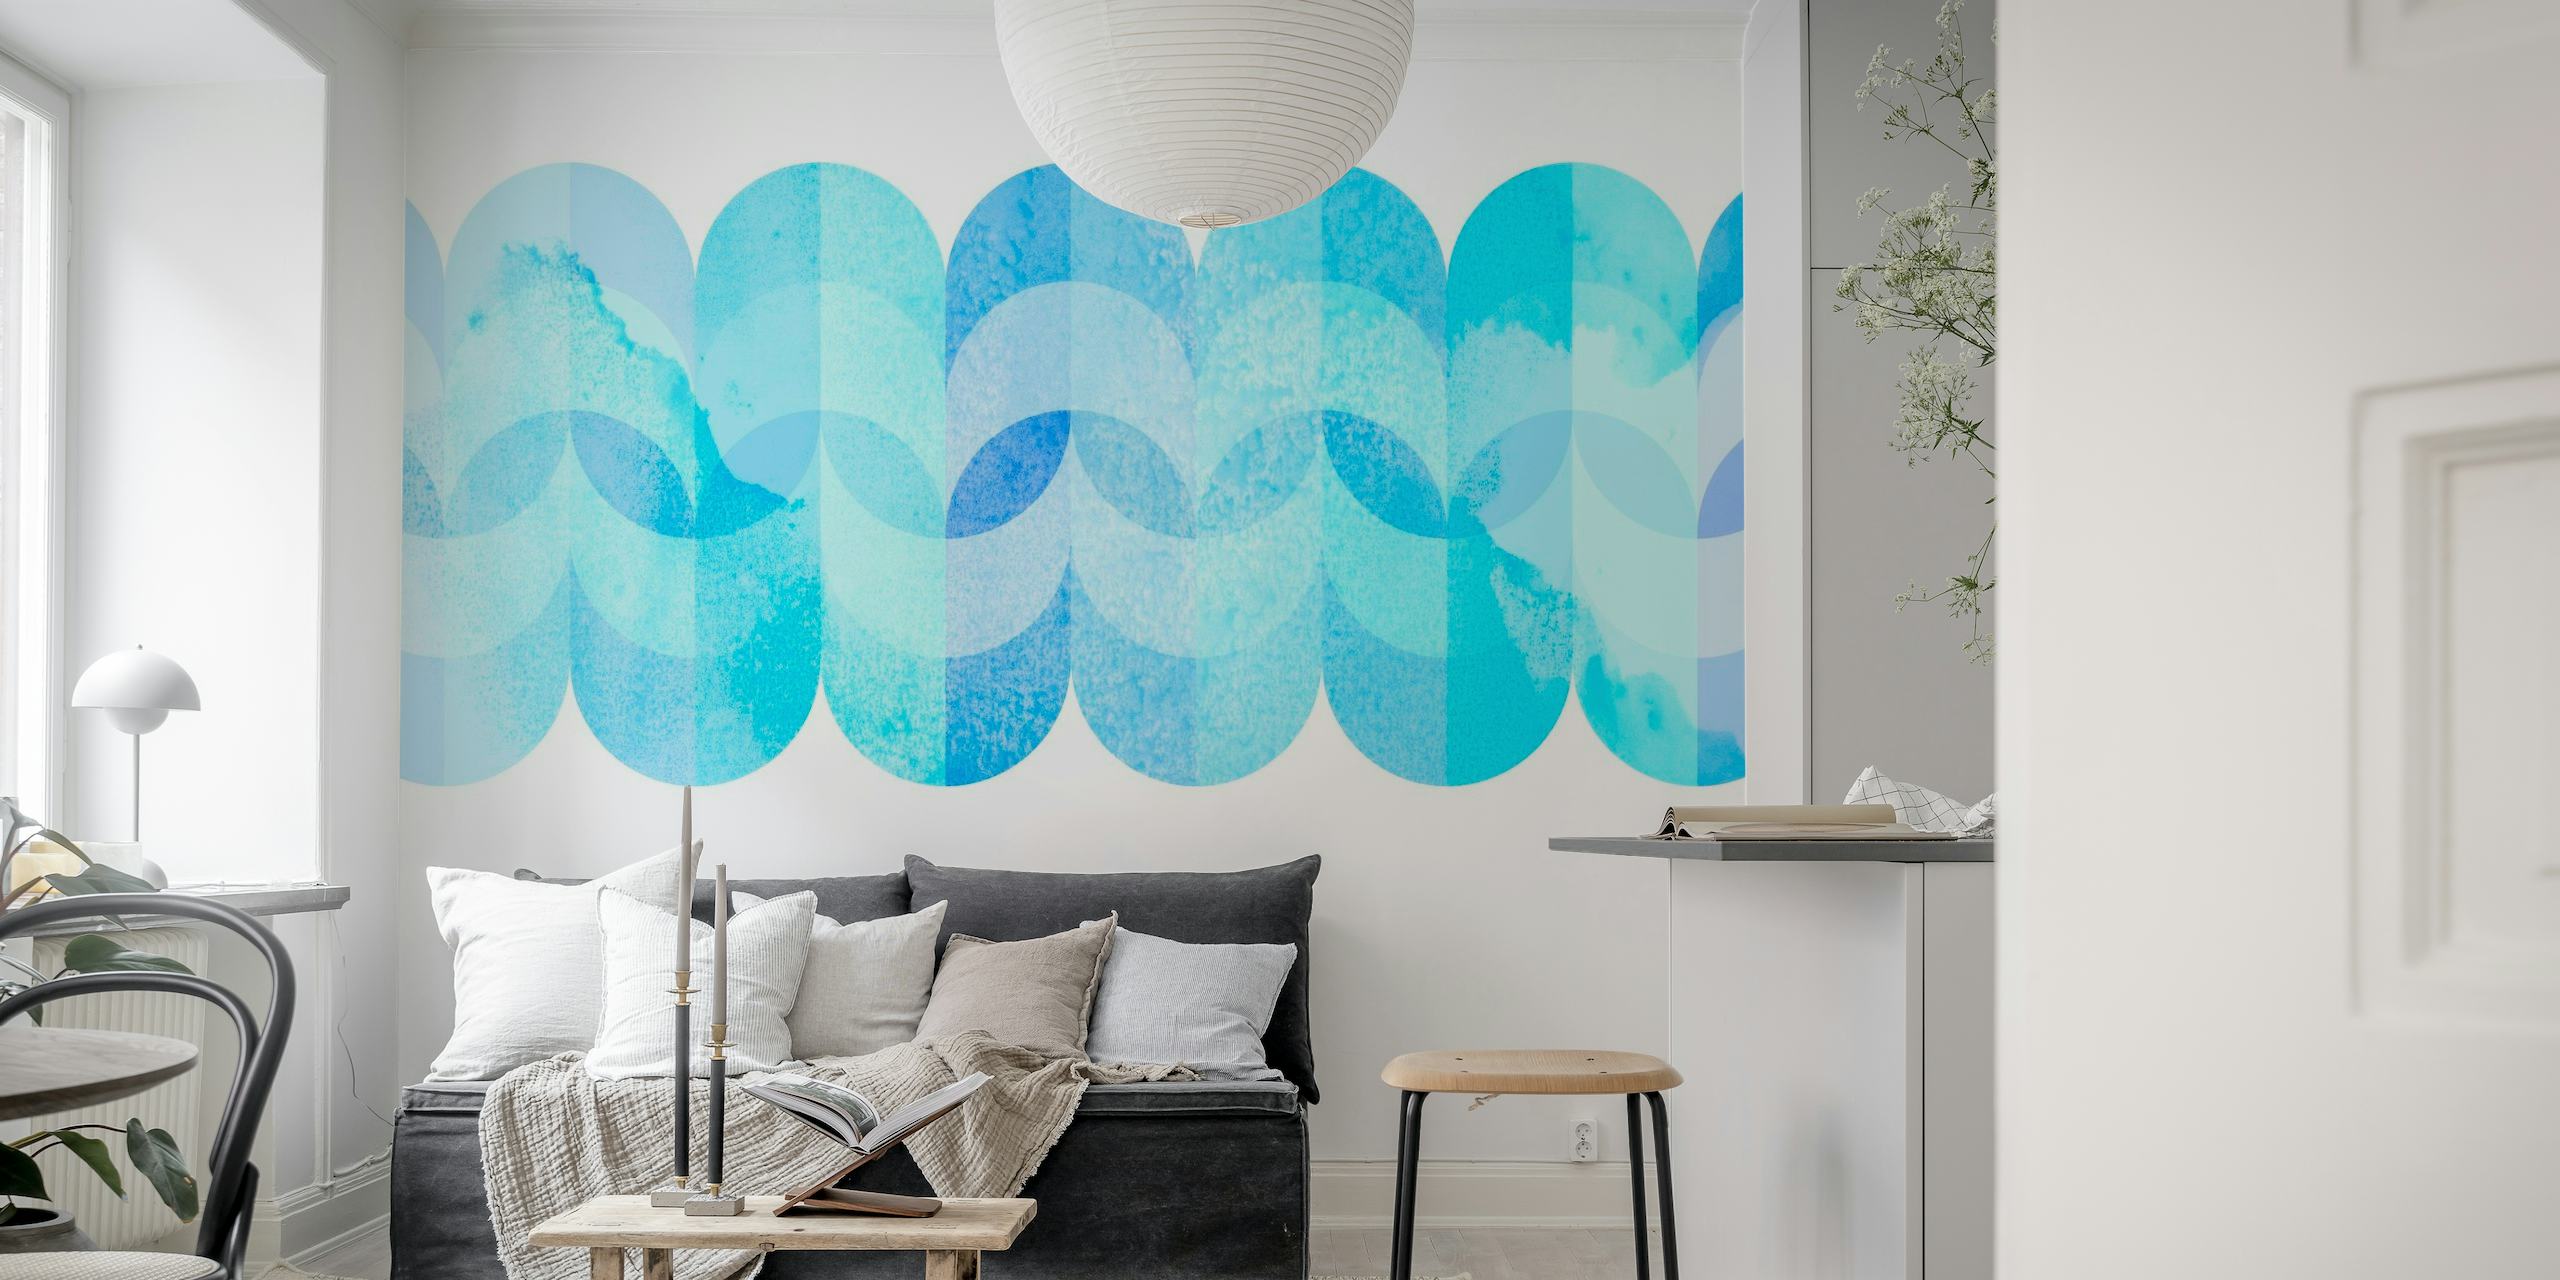 Abstract mid-century modern geometric watercolor waves in seafoam colors